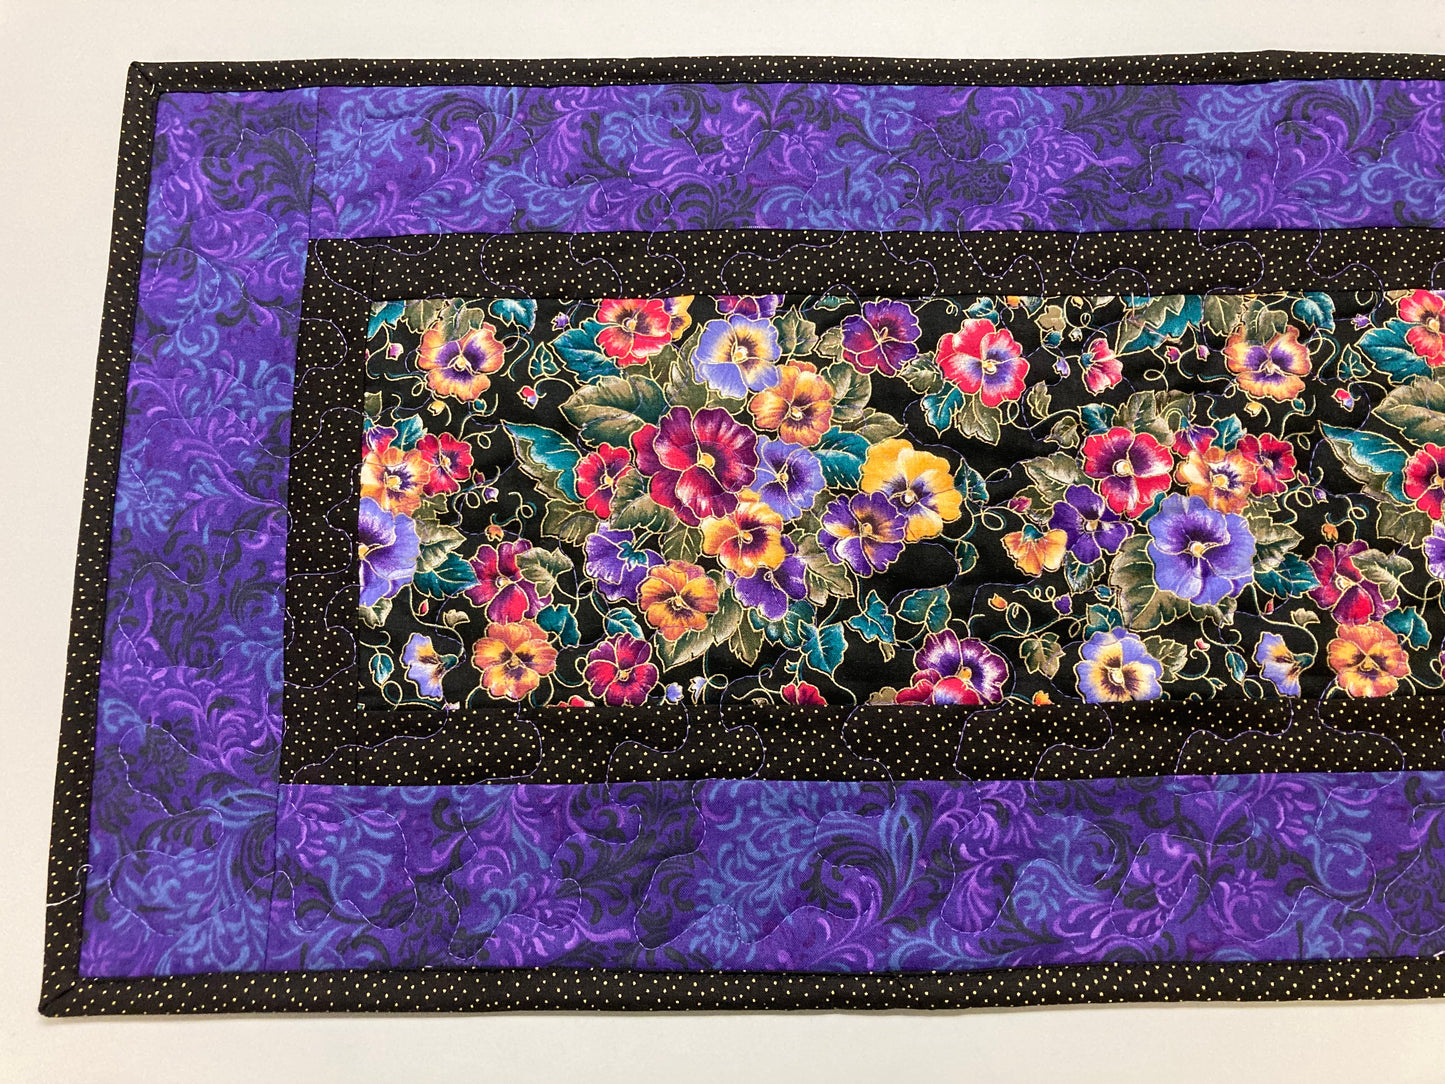 Summer Pansy Bouquet Quilted Dining Table Runner, Reversible 13x48" Coffee End Table Nightstand Mat, Pansies Pink Yellow Blue Garden Nature